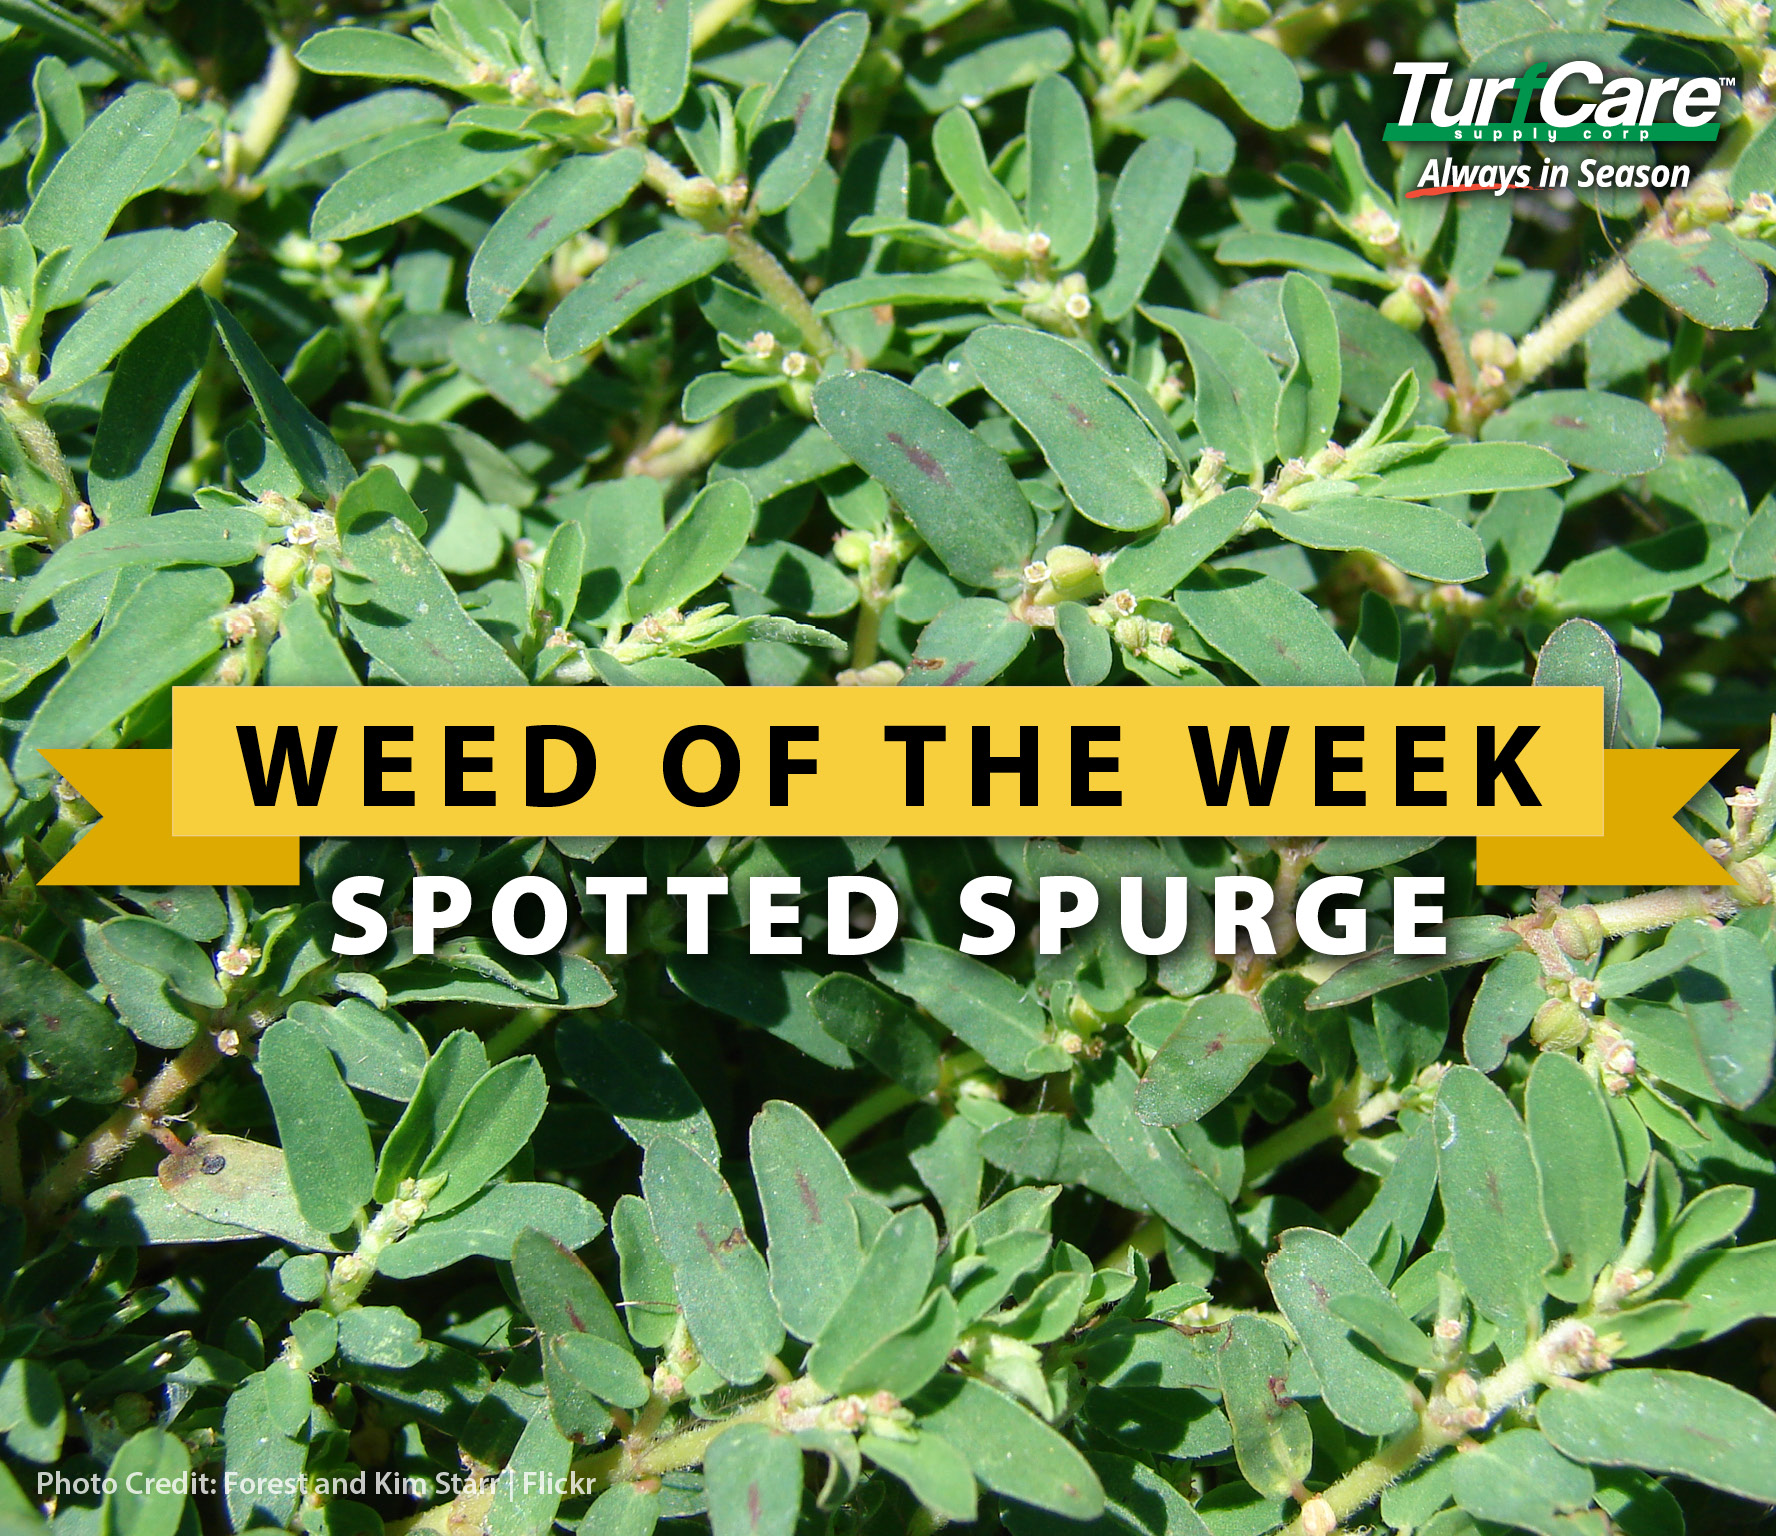 weed of the Week: Spotted Spurge - Turf Care Supply Corporation